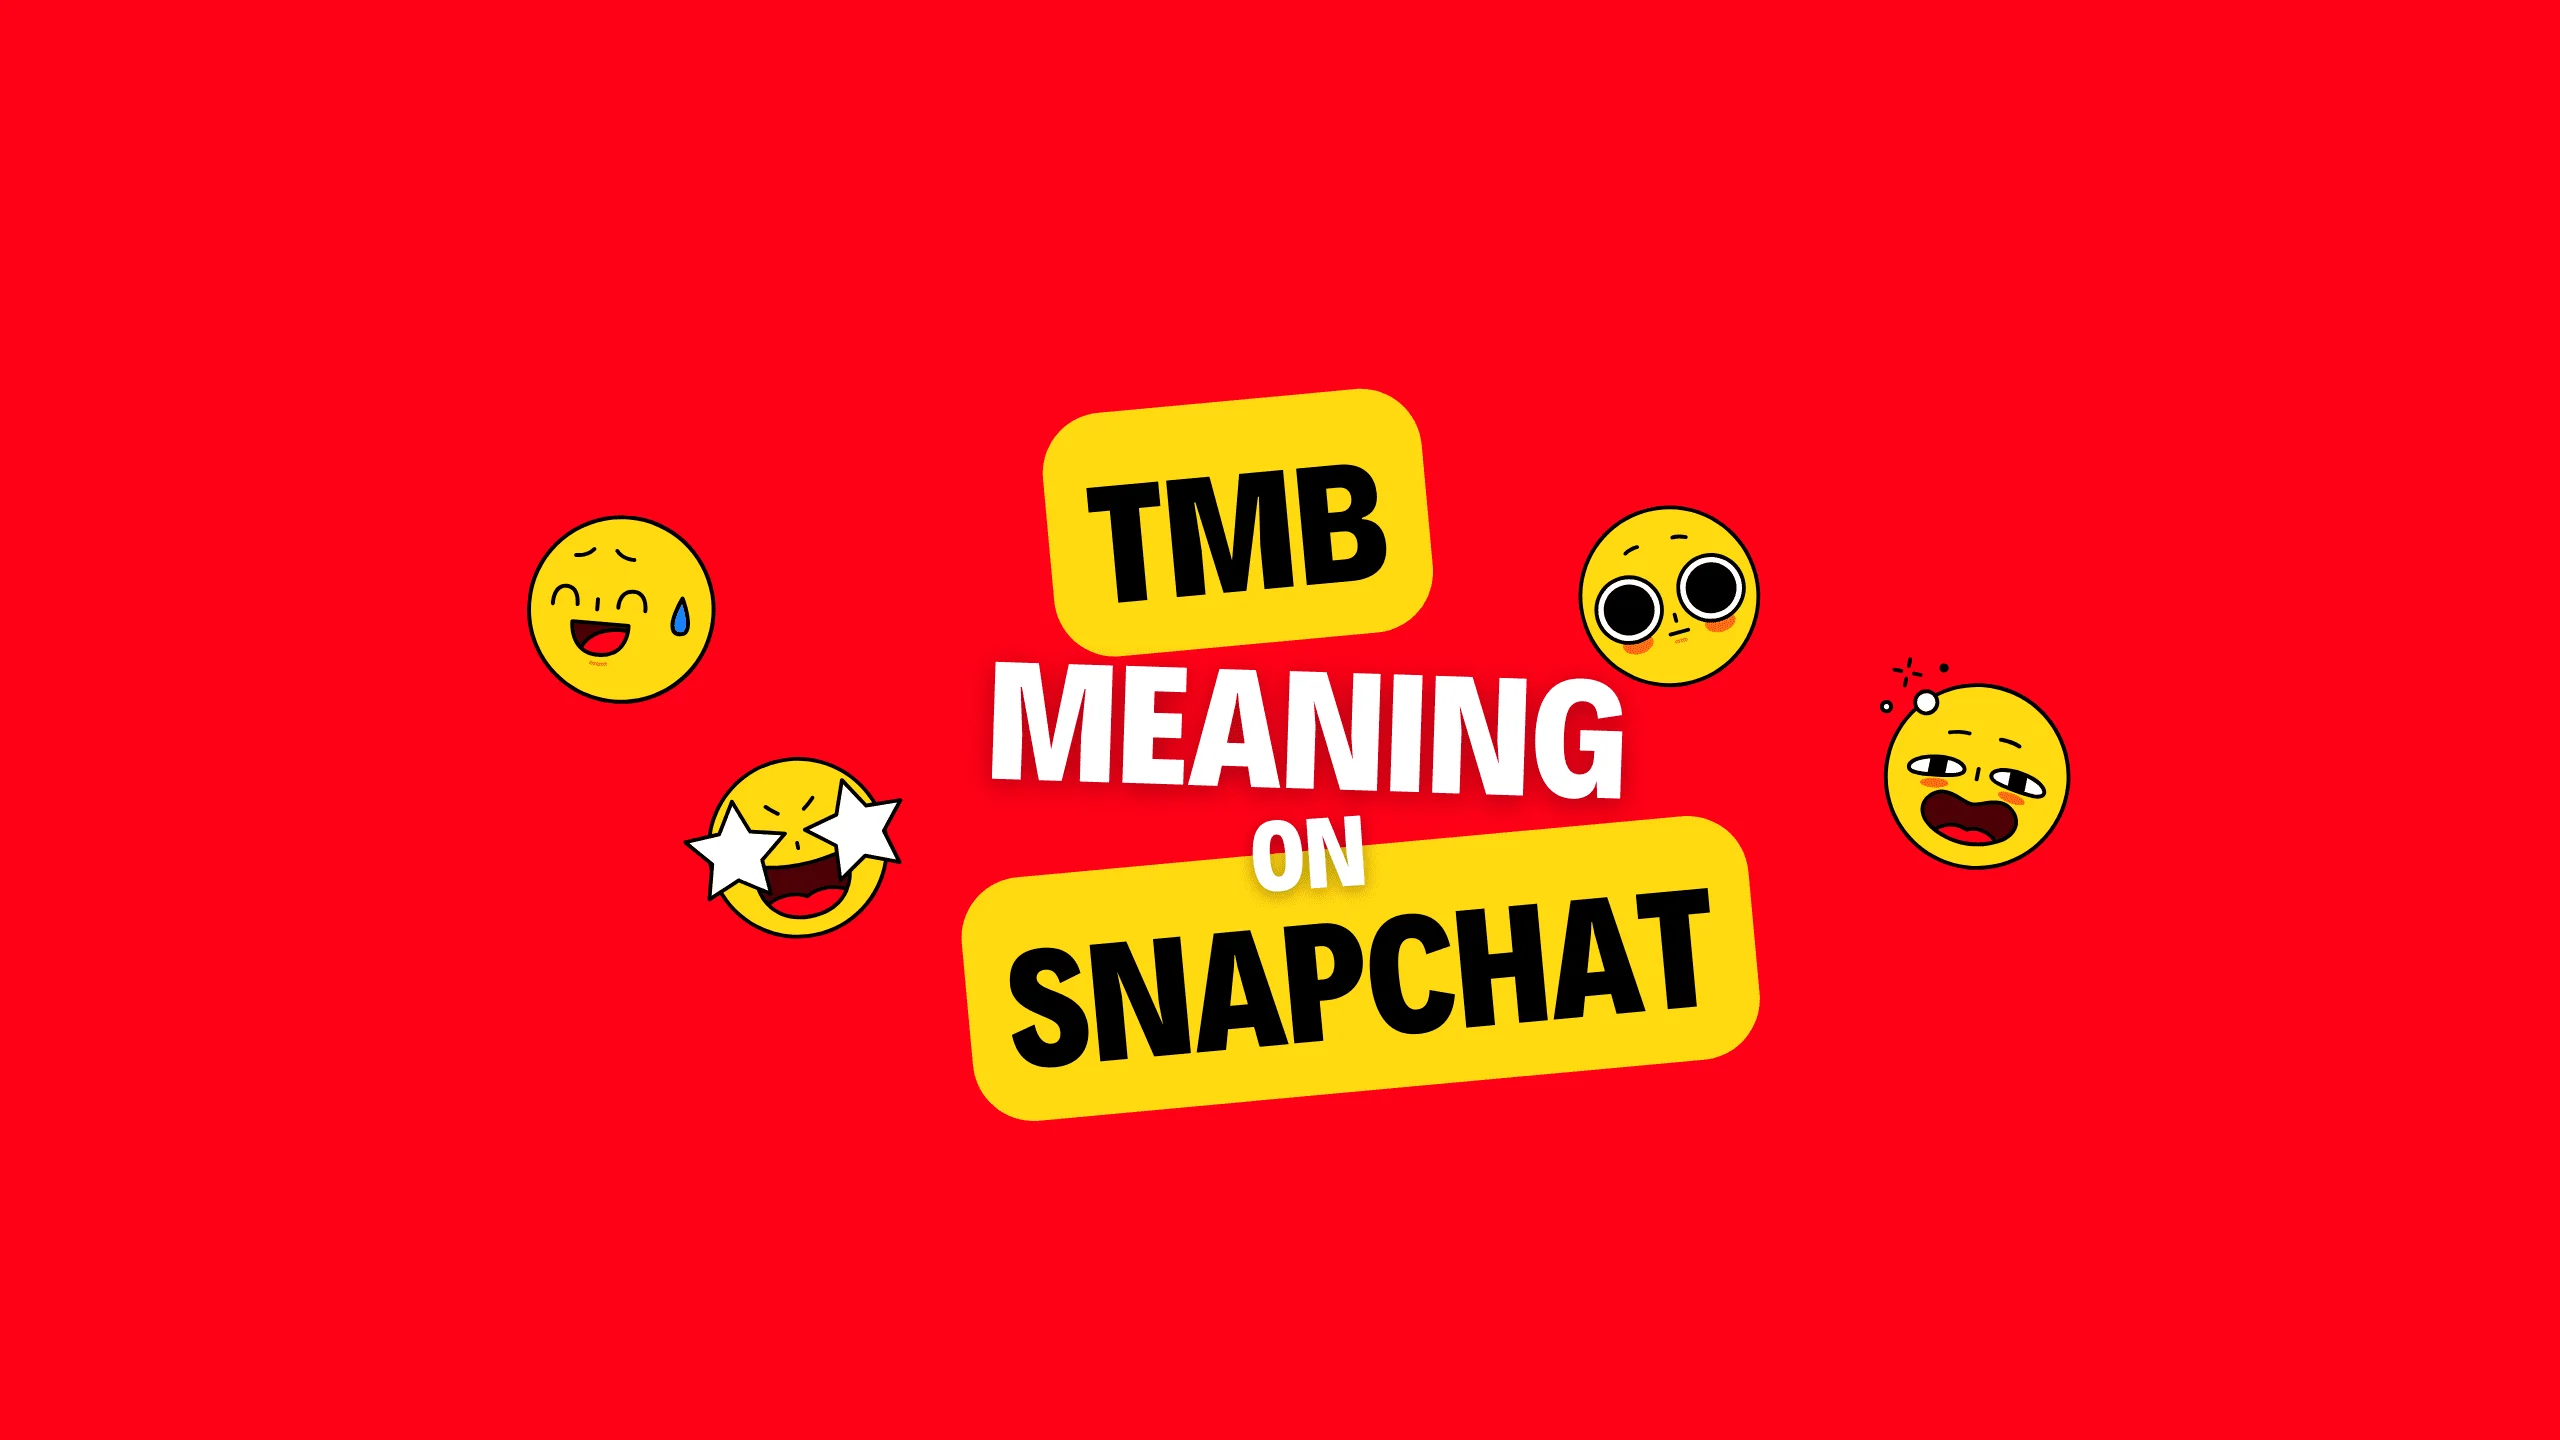 What does TMB mean on Snapchat